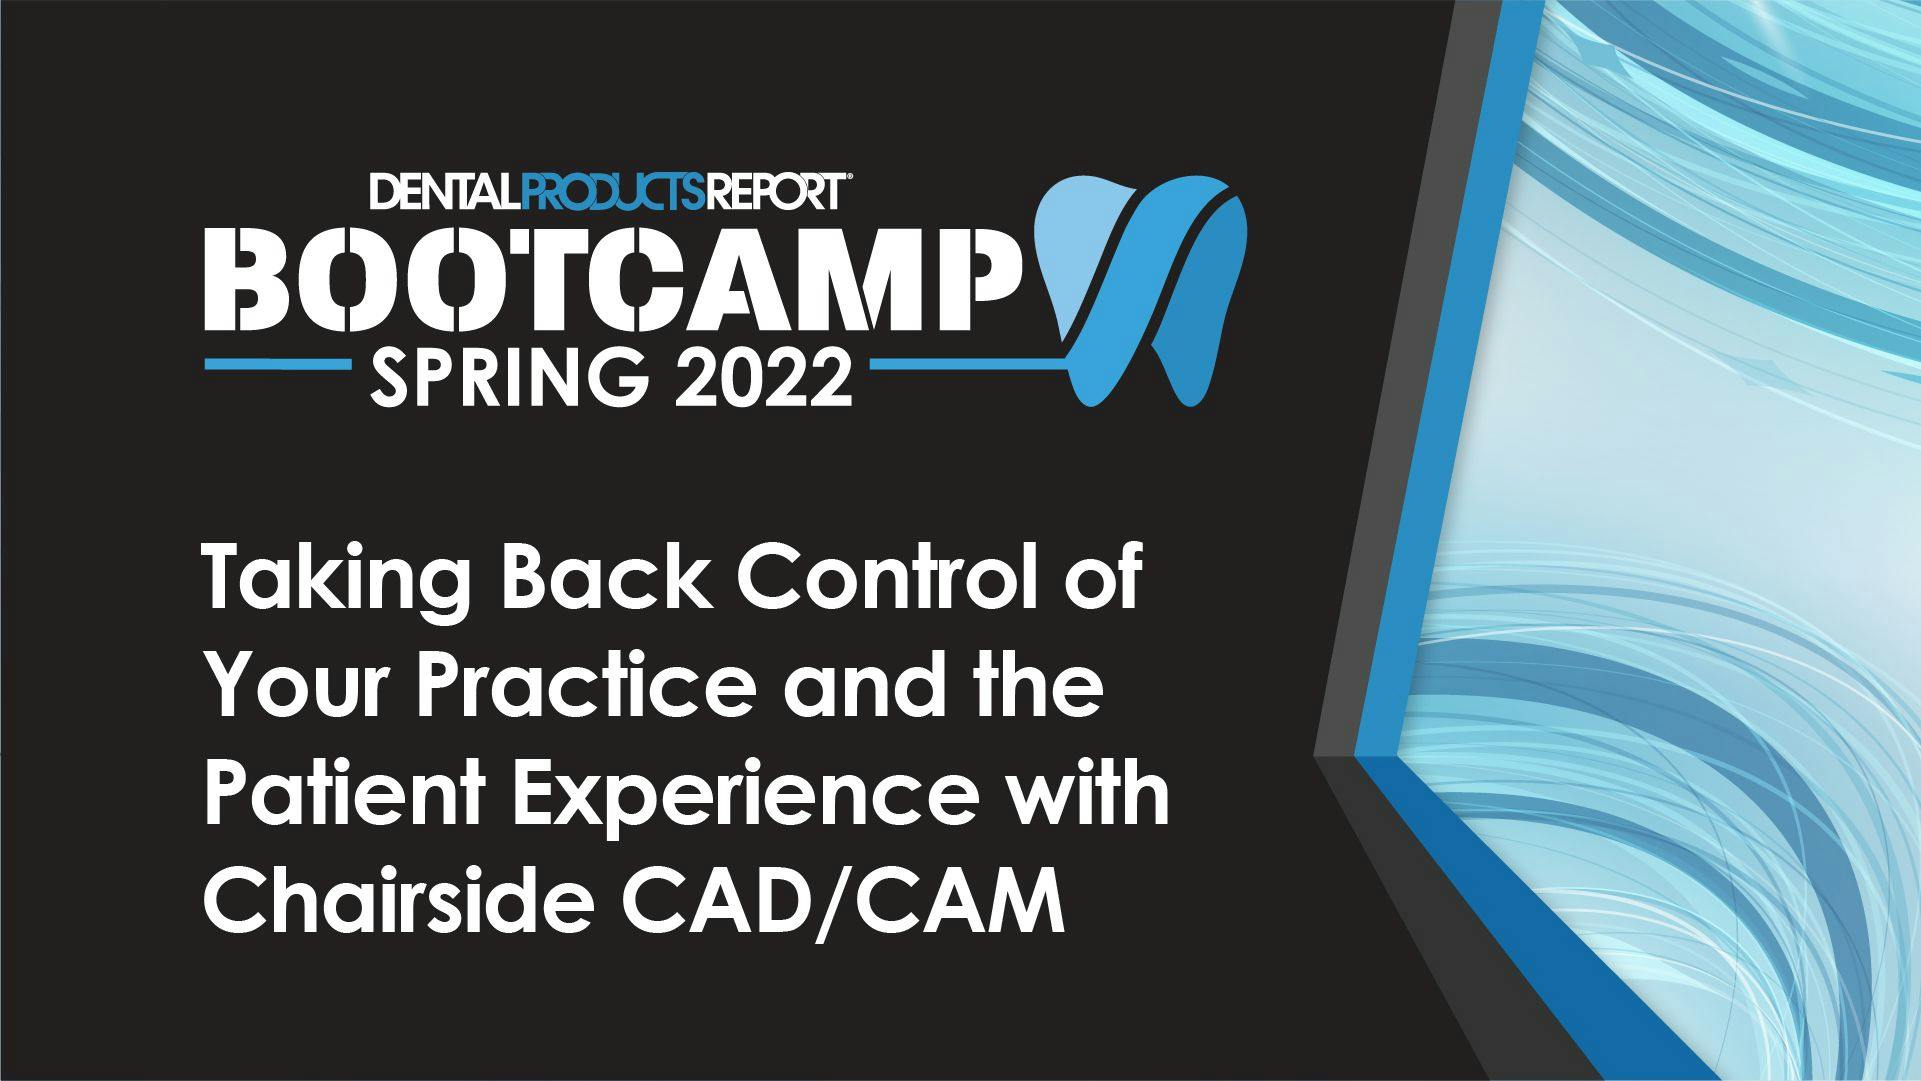 Taking Back Control of Your Practice and the Patient Experience with Chairside CAD/CAM